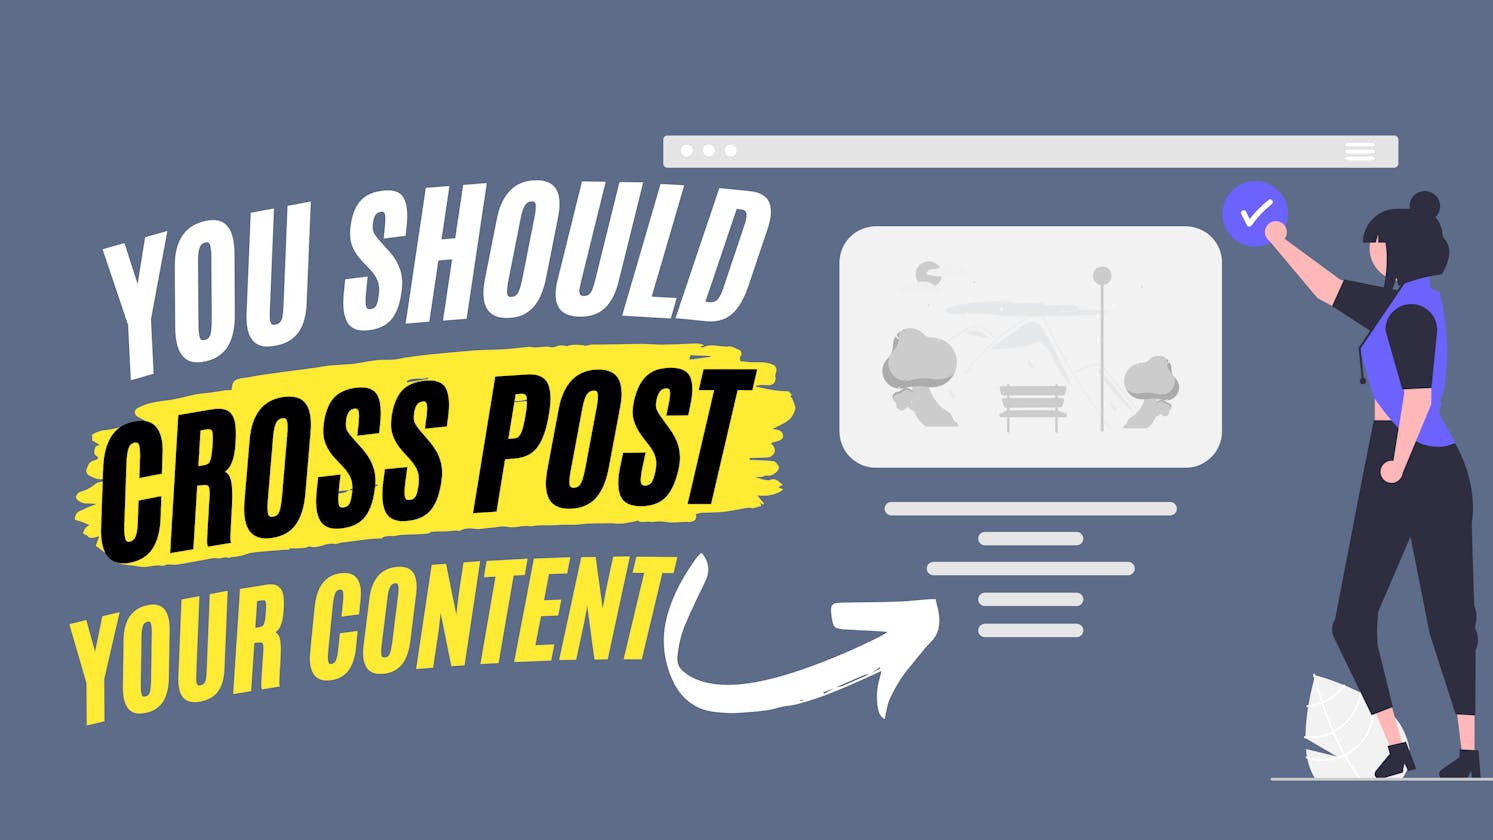 5 reasons why you should cross post your content